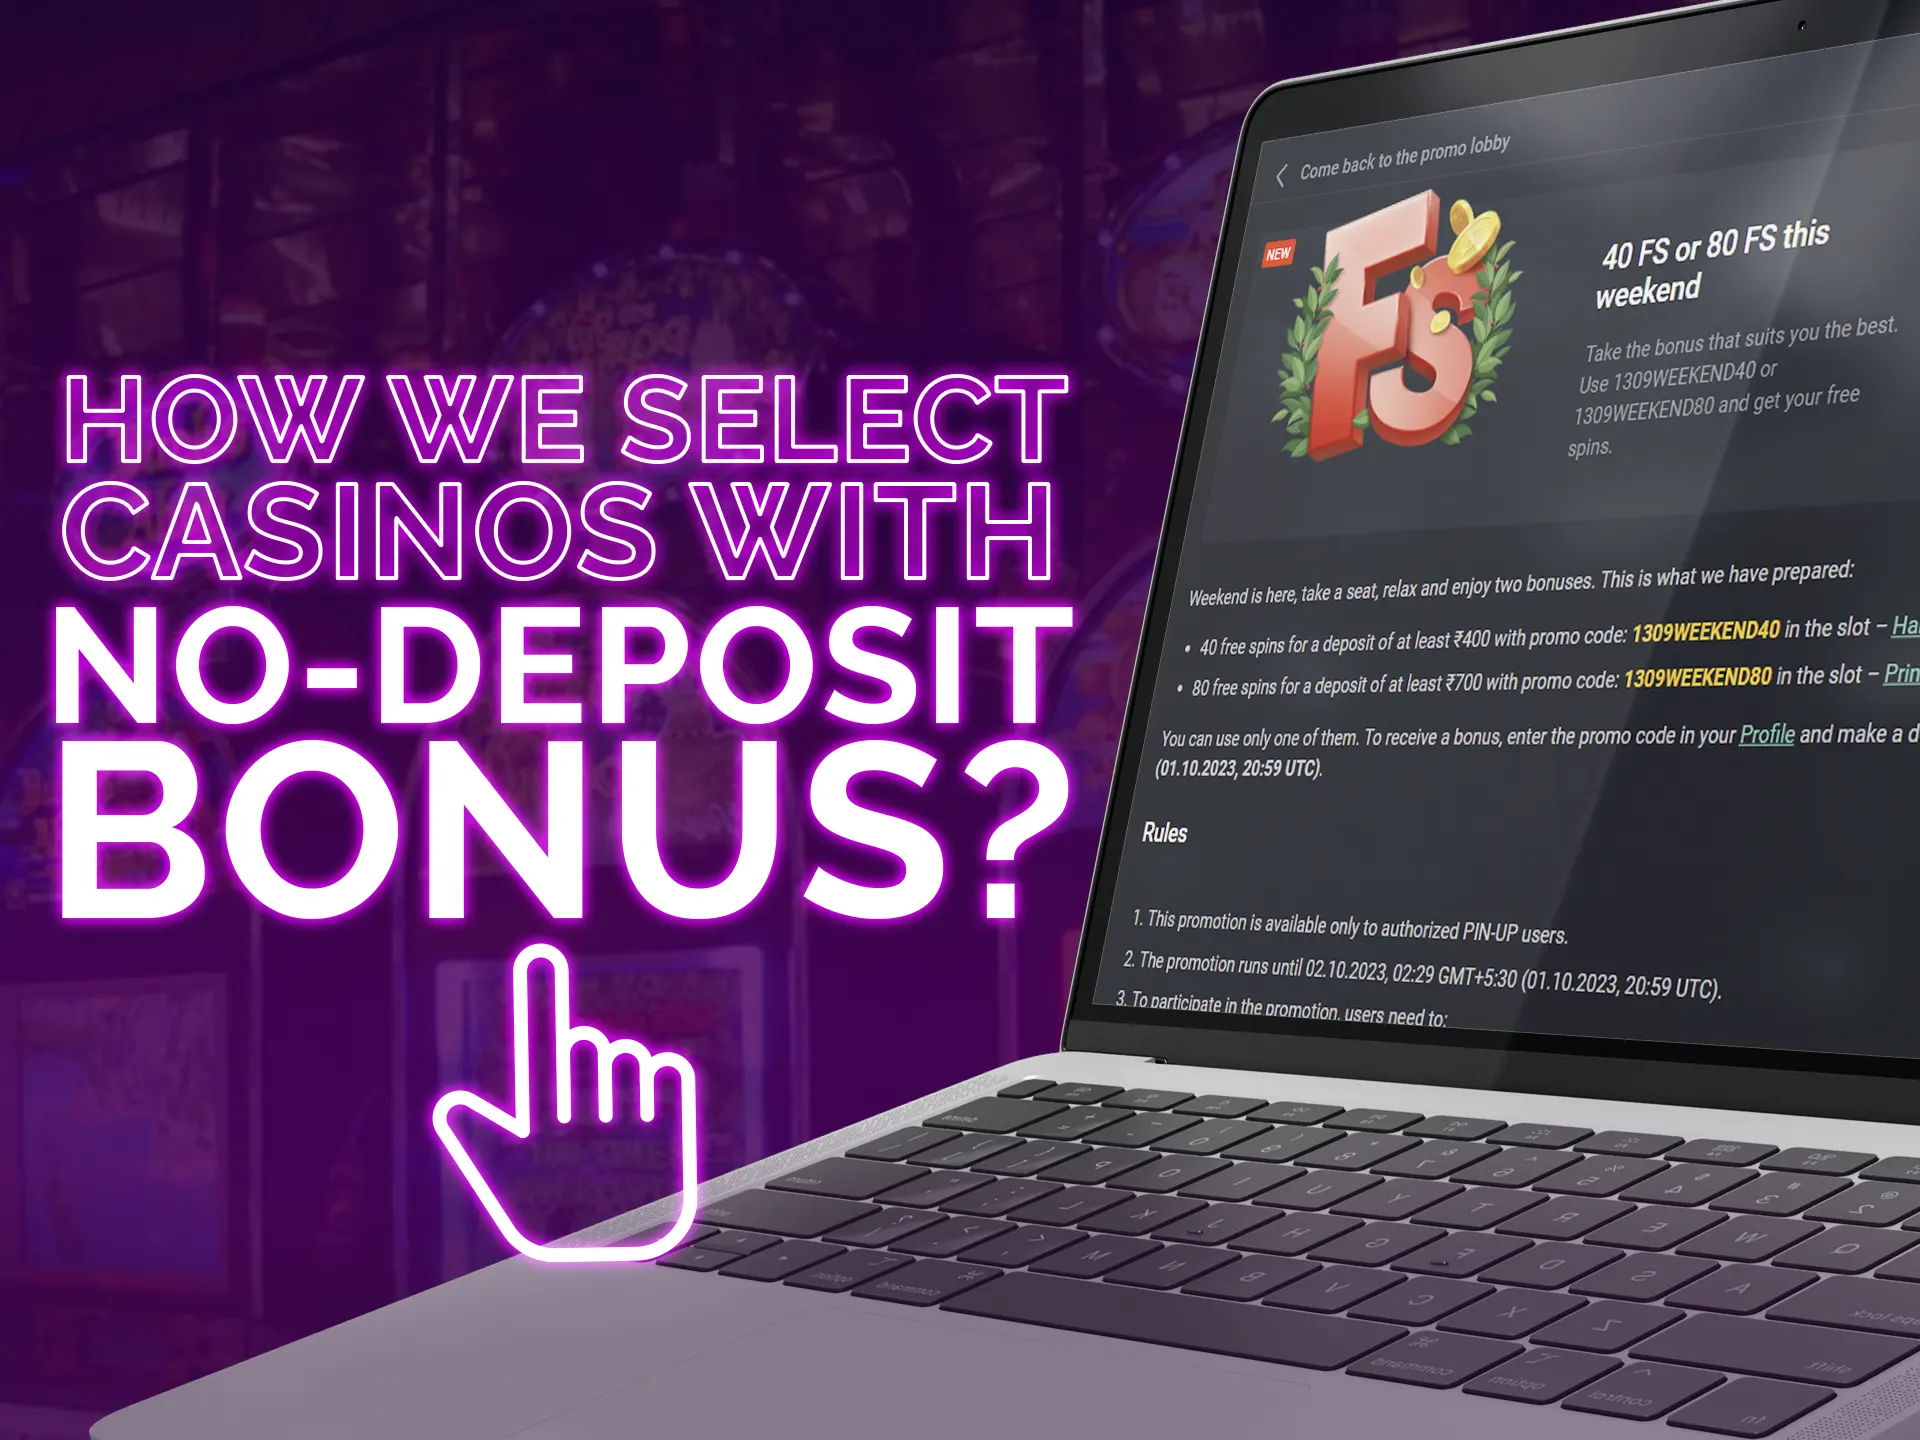 The ways how we selecting best casinos with no-deposit bonuses.